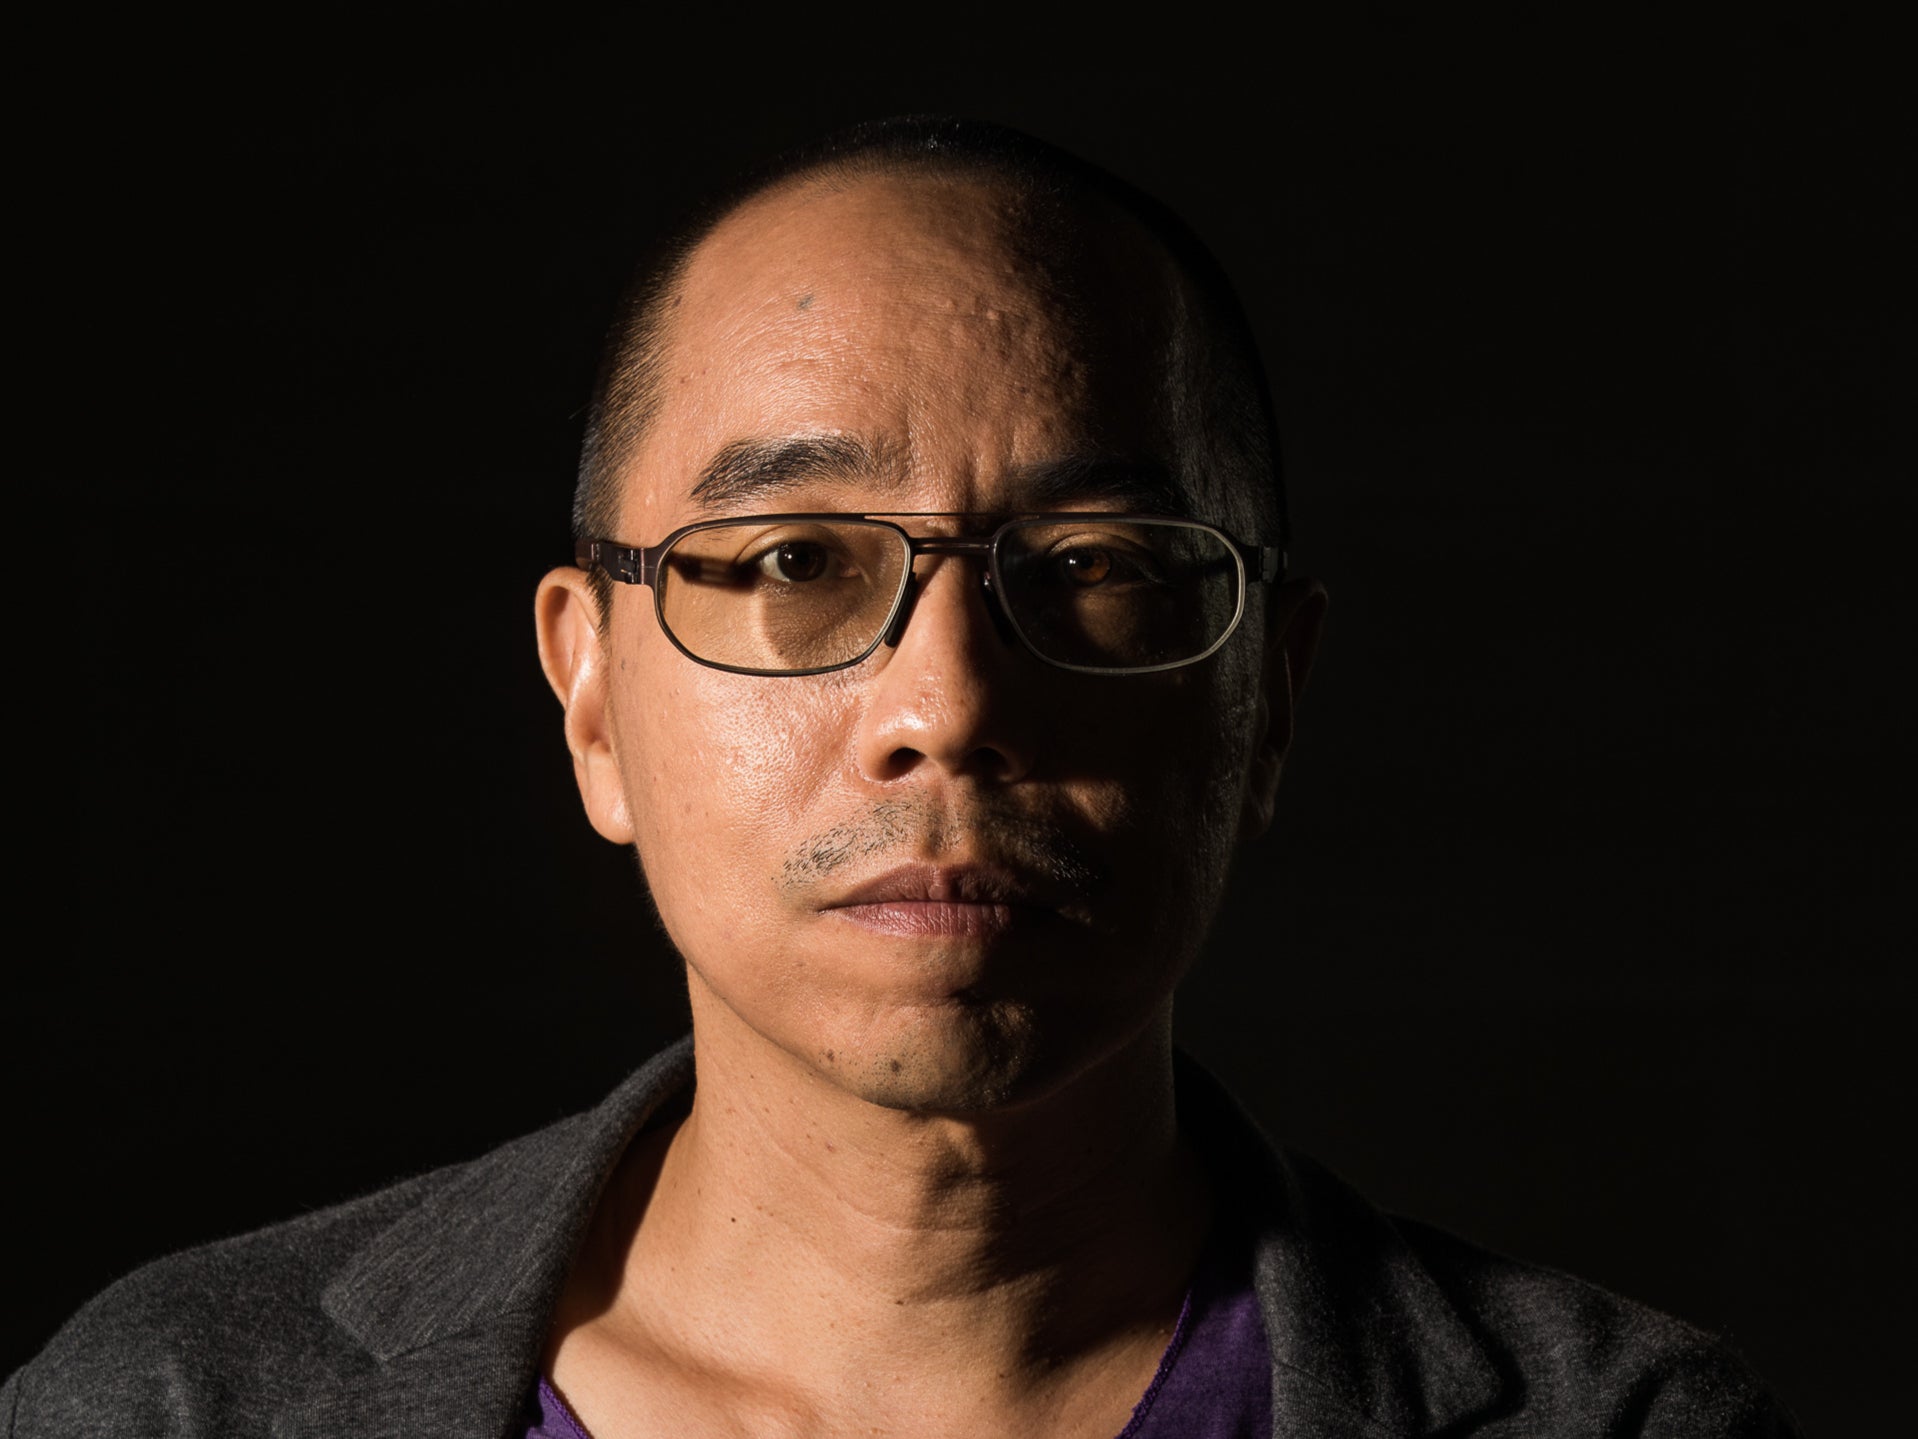 Apichatpong Weerasethakul, director of ‘Memoria’ and ‘Uncle Boonmee Who Can Recall His Past Lives’